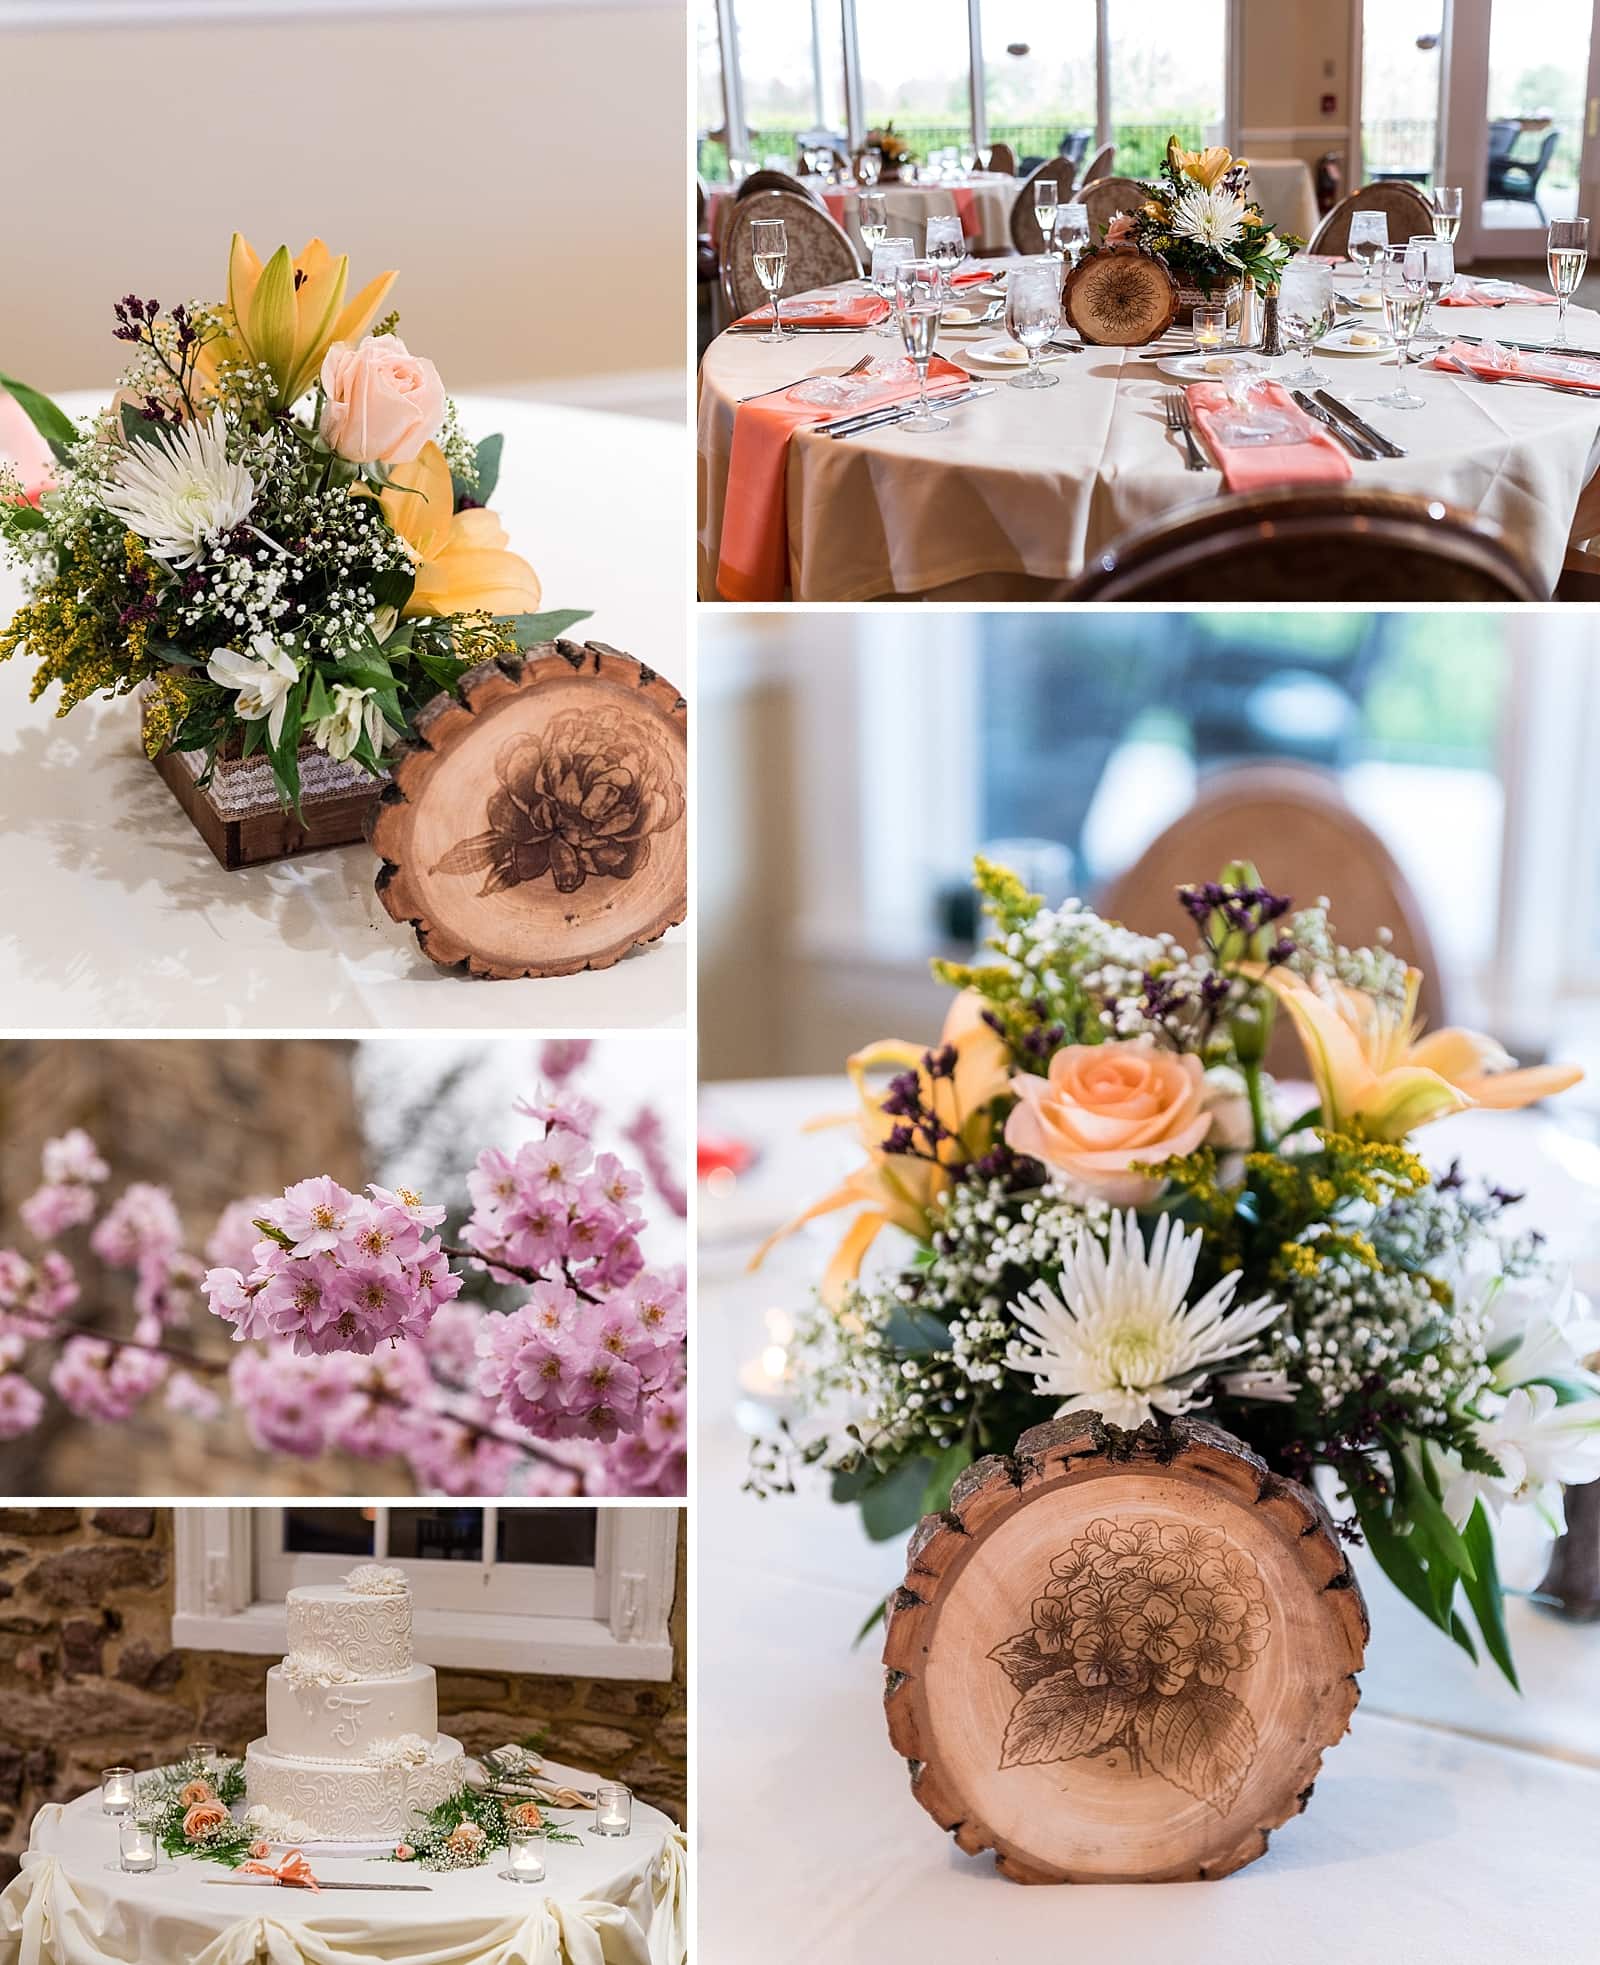 Floral centerpiece, flowers, and cake details, The Manor House at Commonwealth wedding